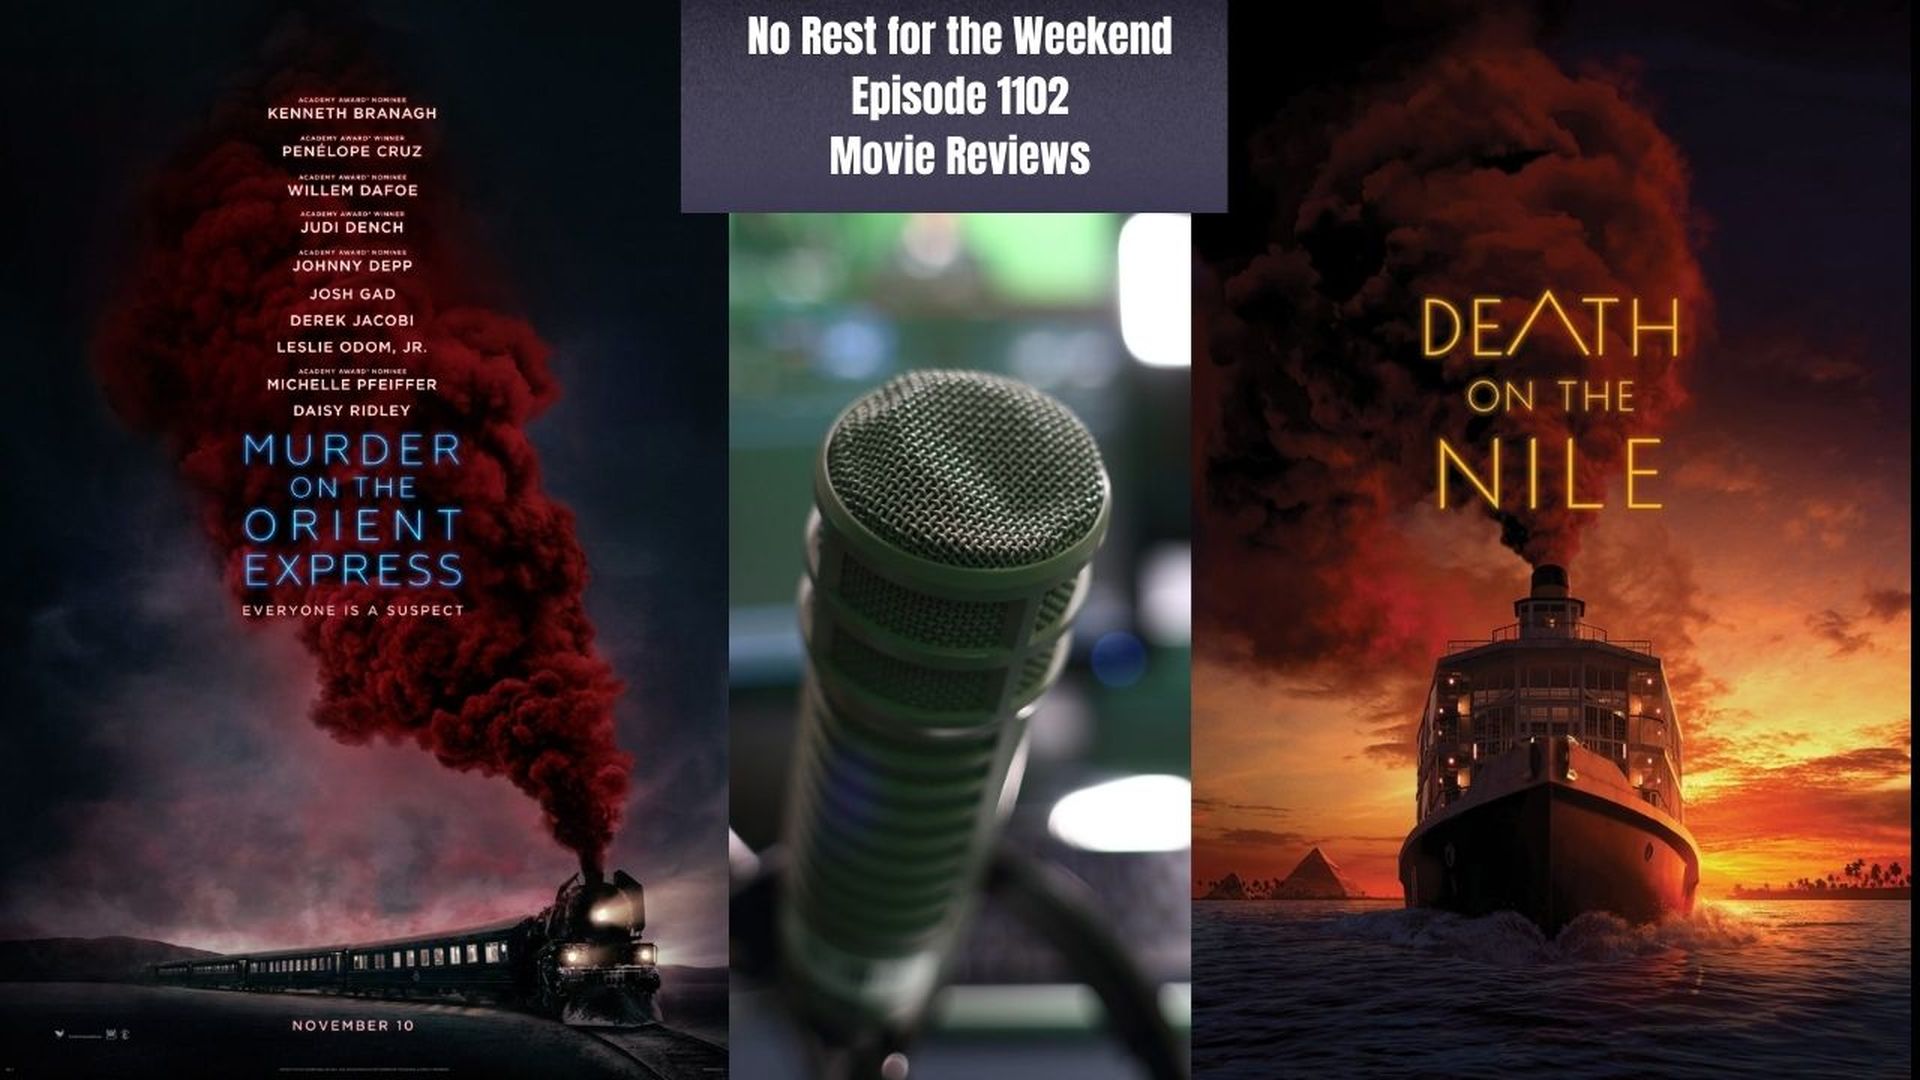 Episode 1102: Murder on the Orient Express &  Death on the Nile- Review